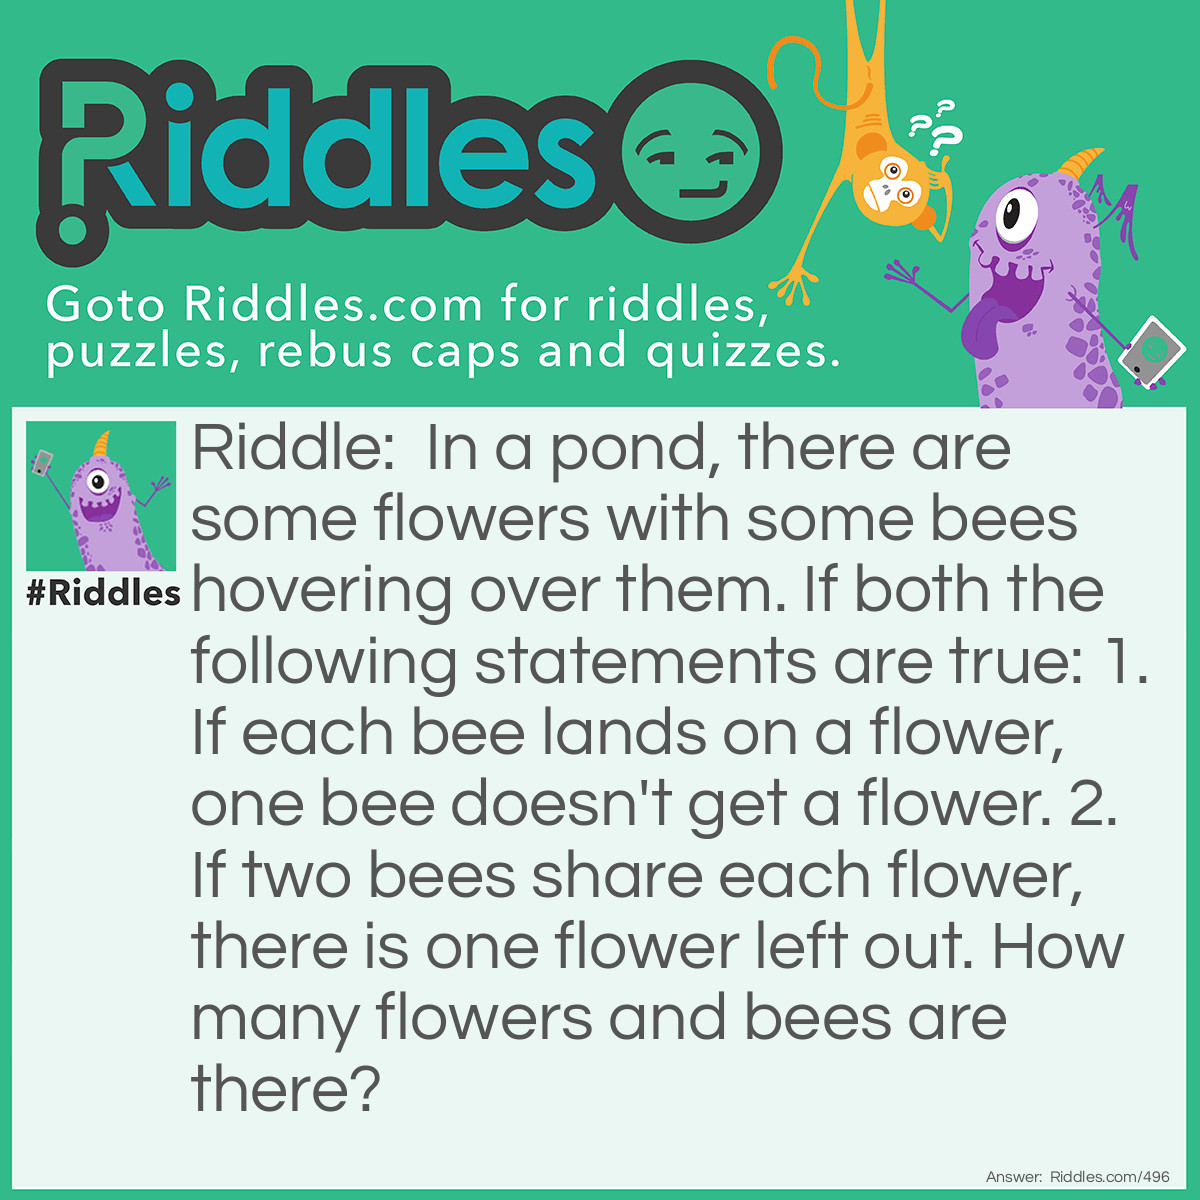 Riddle: In a pond, there are some flowers with some bees hovering over them. If both the following statements are true: 1. If each bee lands on a flower, one bee doesn't get a flower. 2. If two bees share each flower, there is one flower left out. How many flowers and bees are there? Answer: 4 bees and 3 flowers.